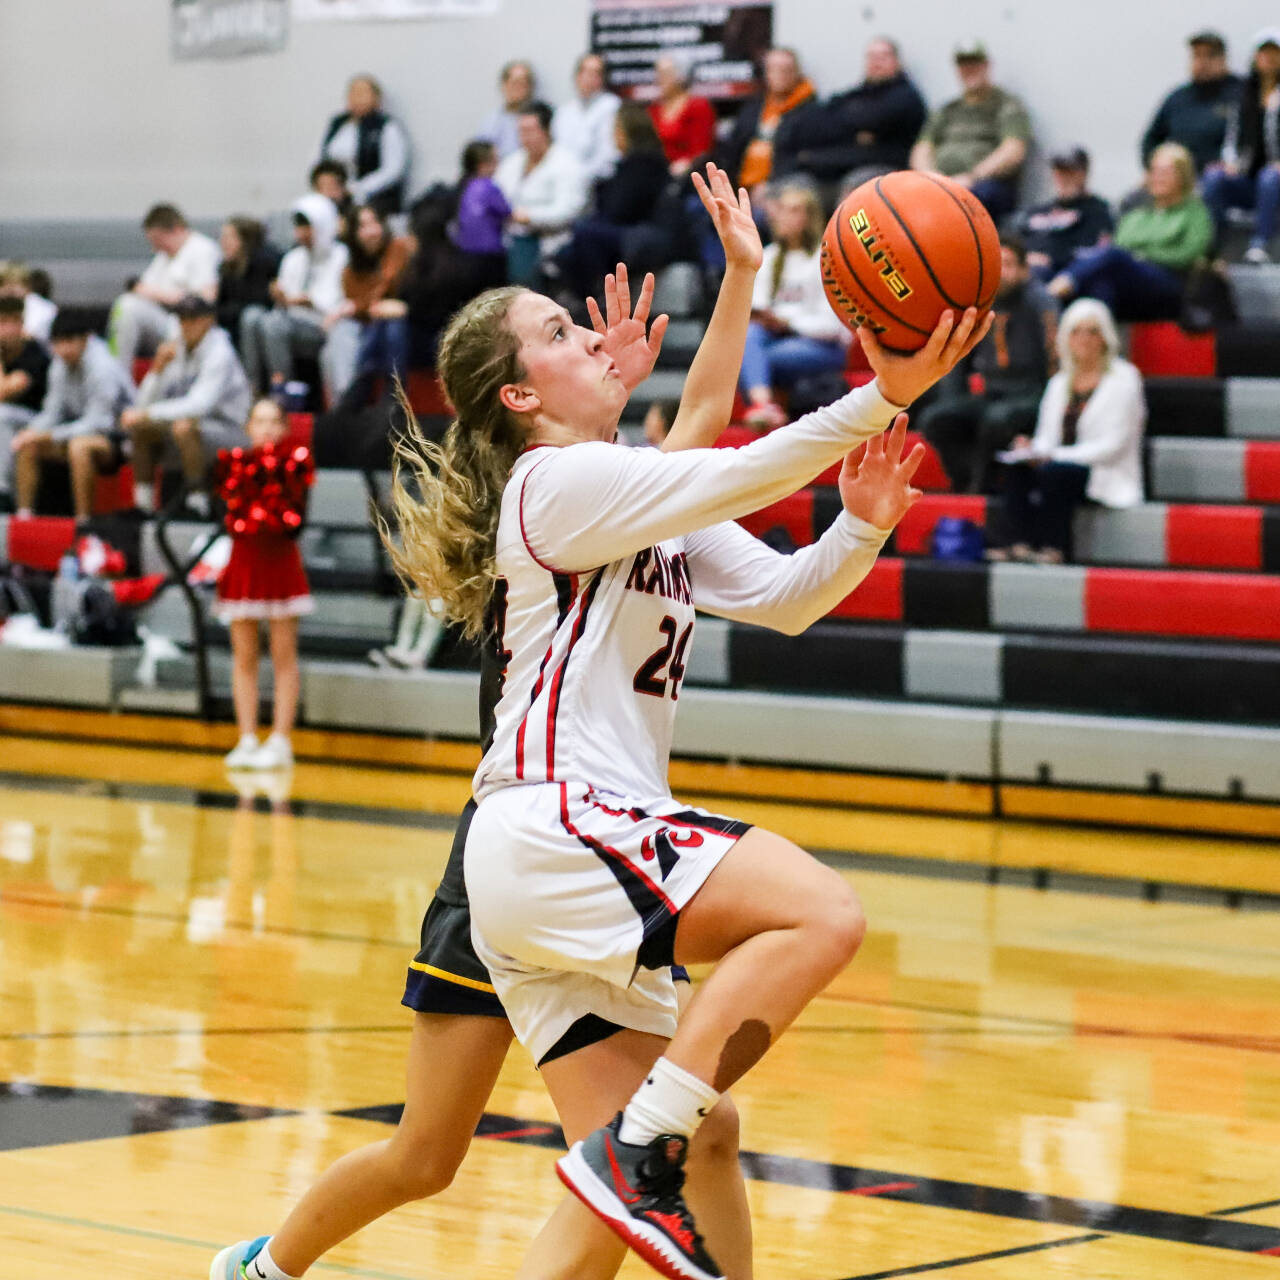 PHOTO BY LARRY BALE Raymond sophomore guard Karsyn Freeman, seen here in a file photo, scored 45 points in a 61-60 loss to Rainier on Thursday in Raymond.